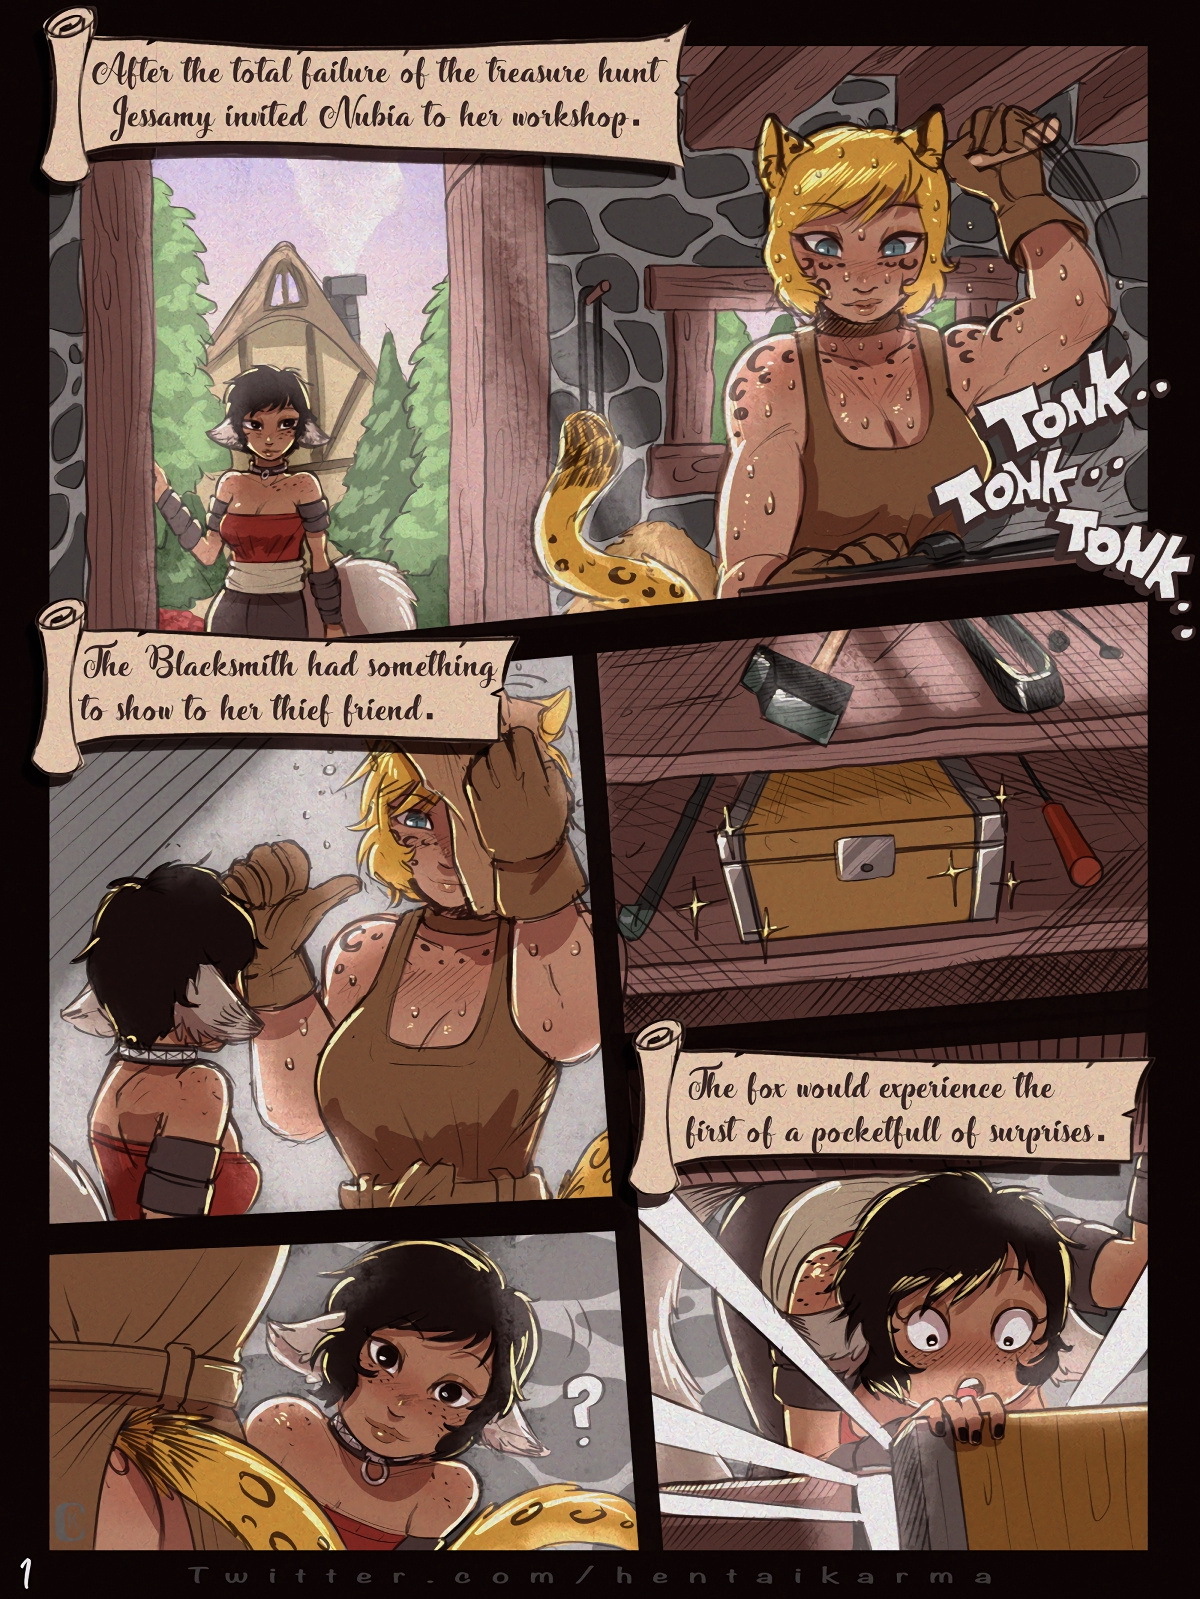 The swindler's tale 2: Outfoxing the Fox - Page 2